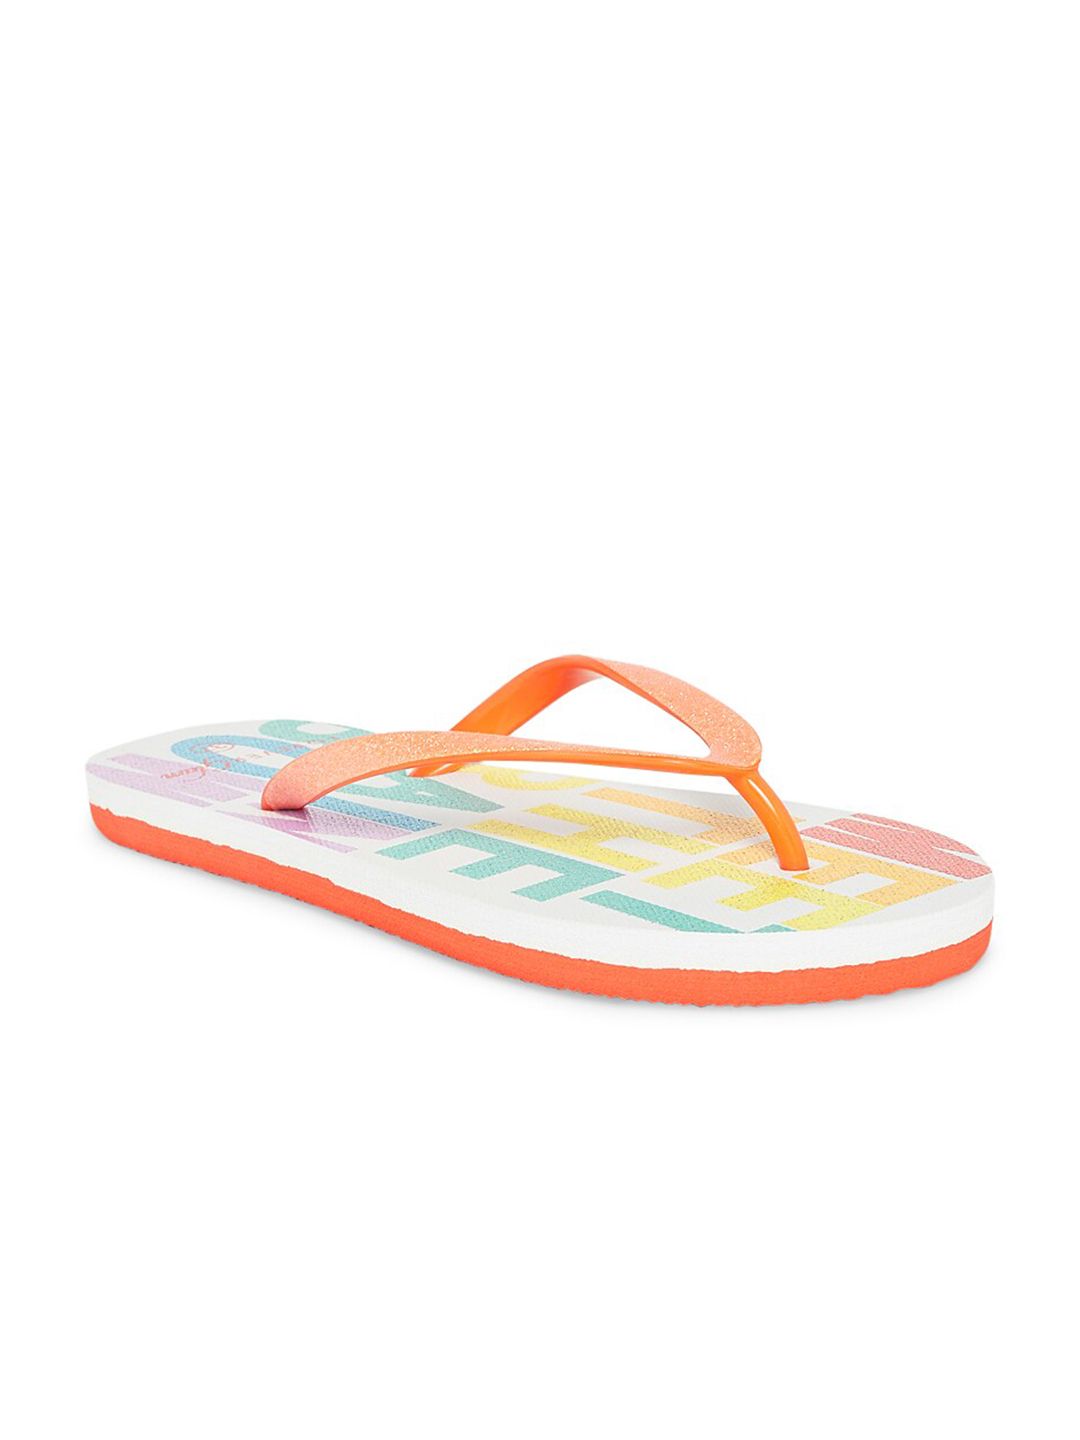 Forever Glam by Pantaloons Women White & Coral Orange Printed Thong Flip-Flops Price in India